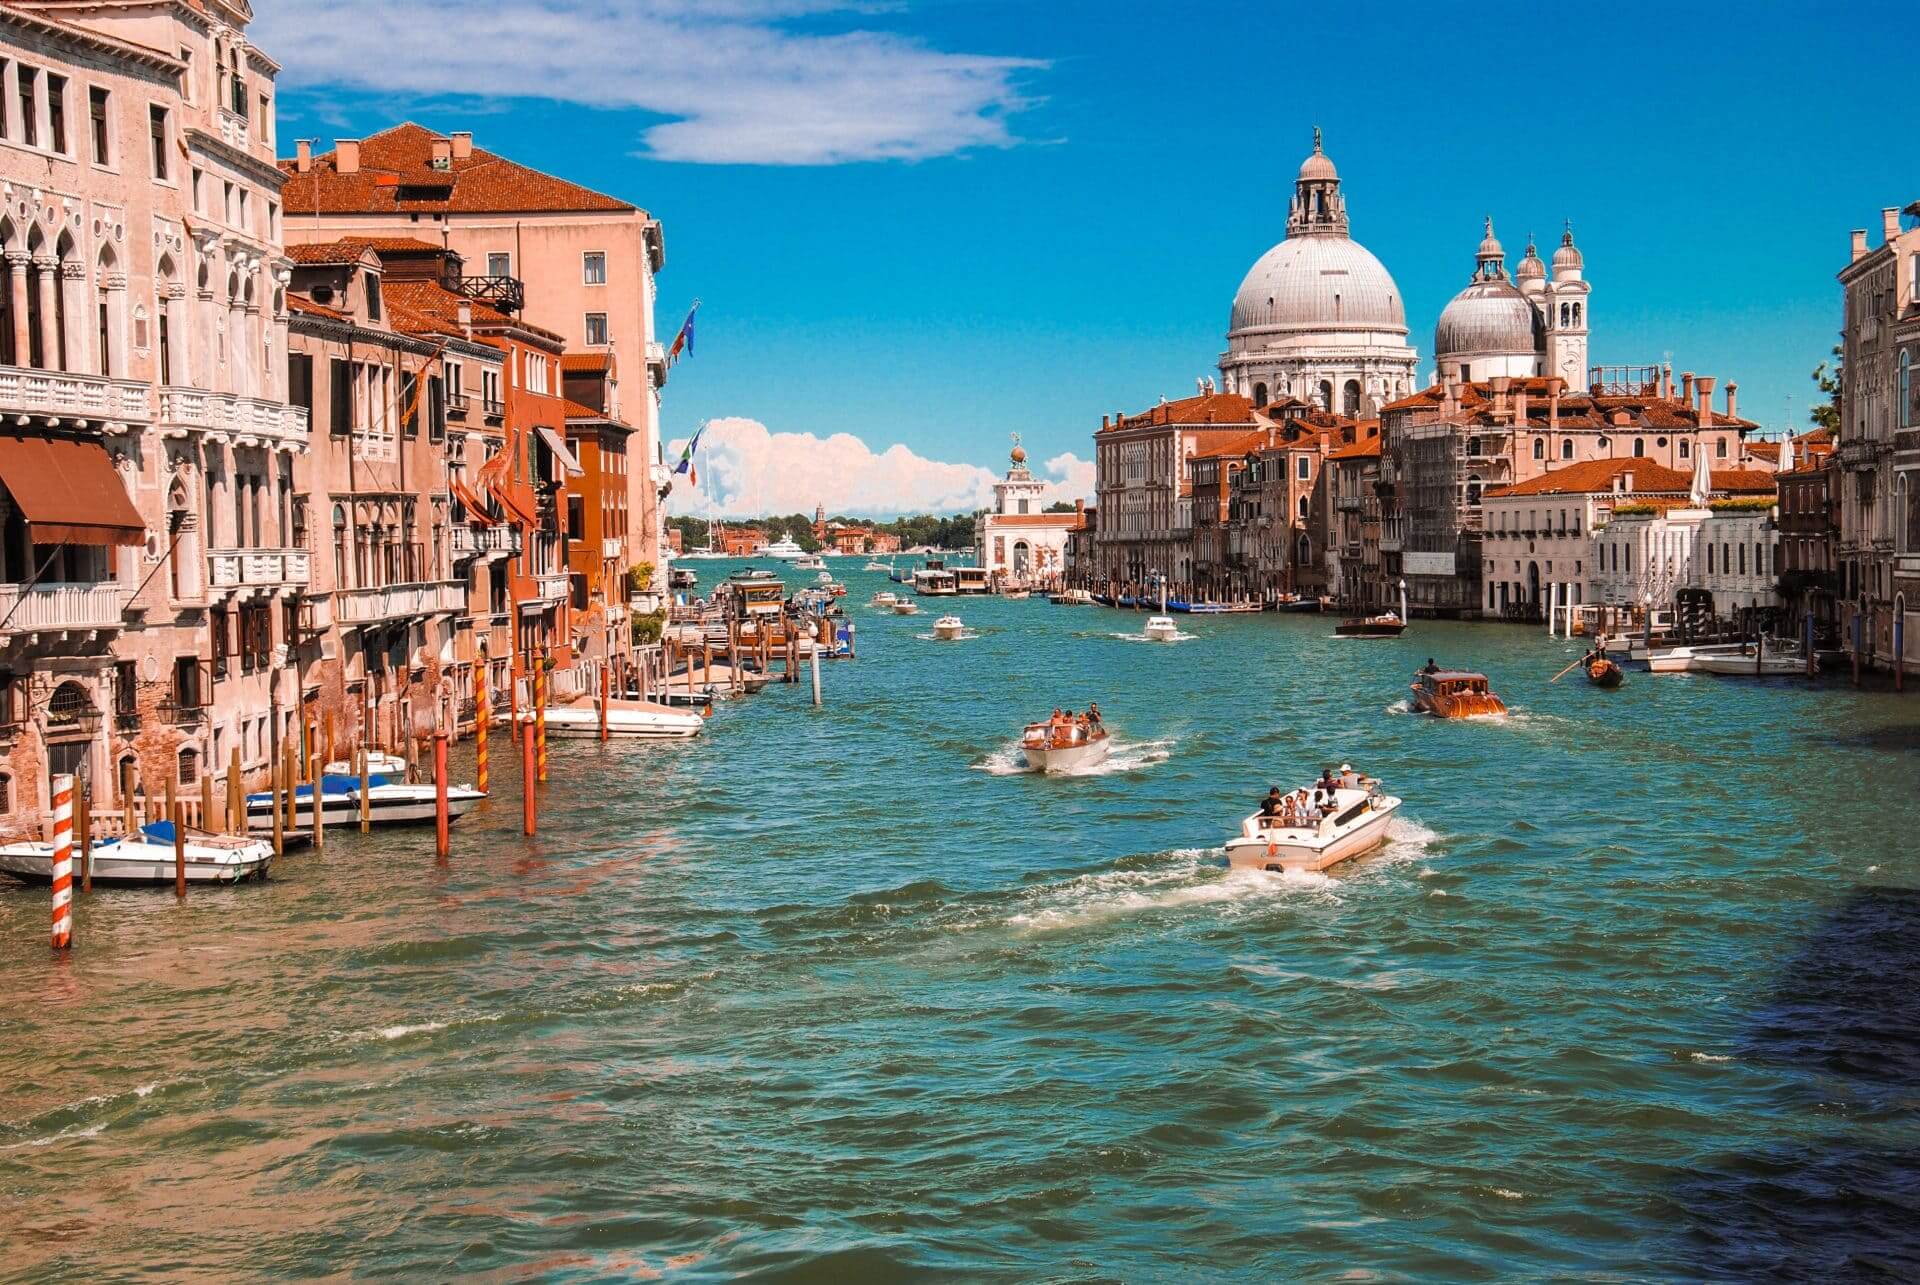 Venice on a Jewish heritage tour of Italy. Several boats flow through a main canal in the Metropolitan city of venice